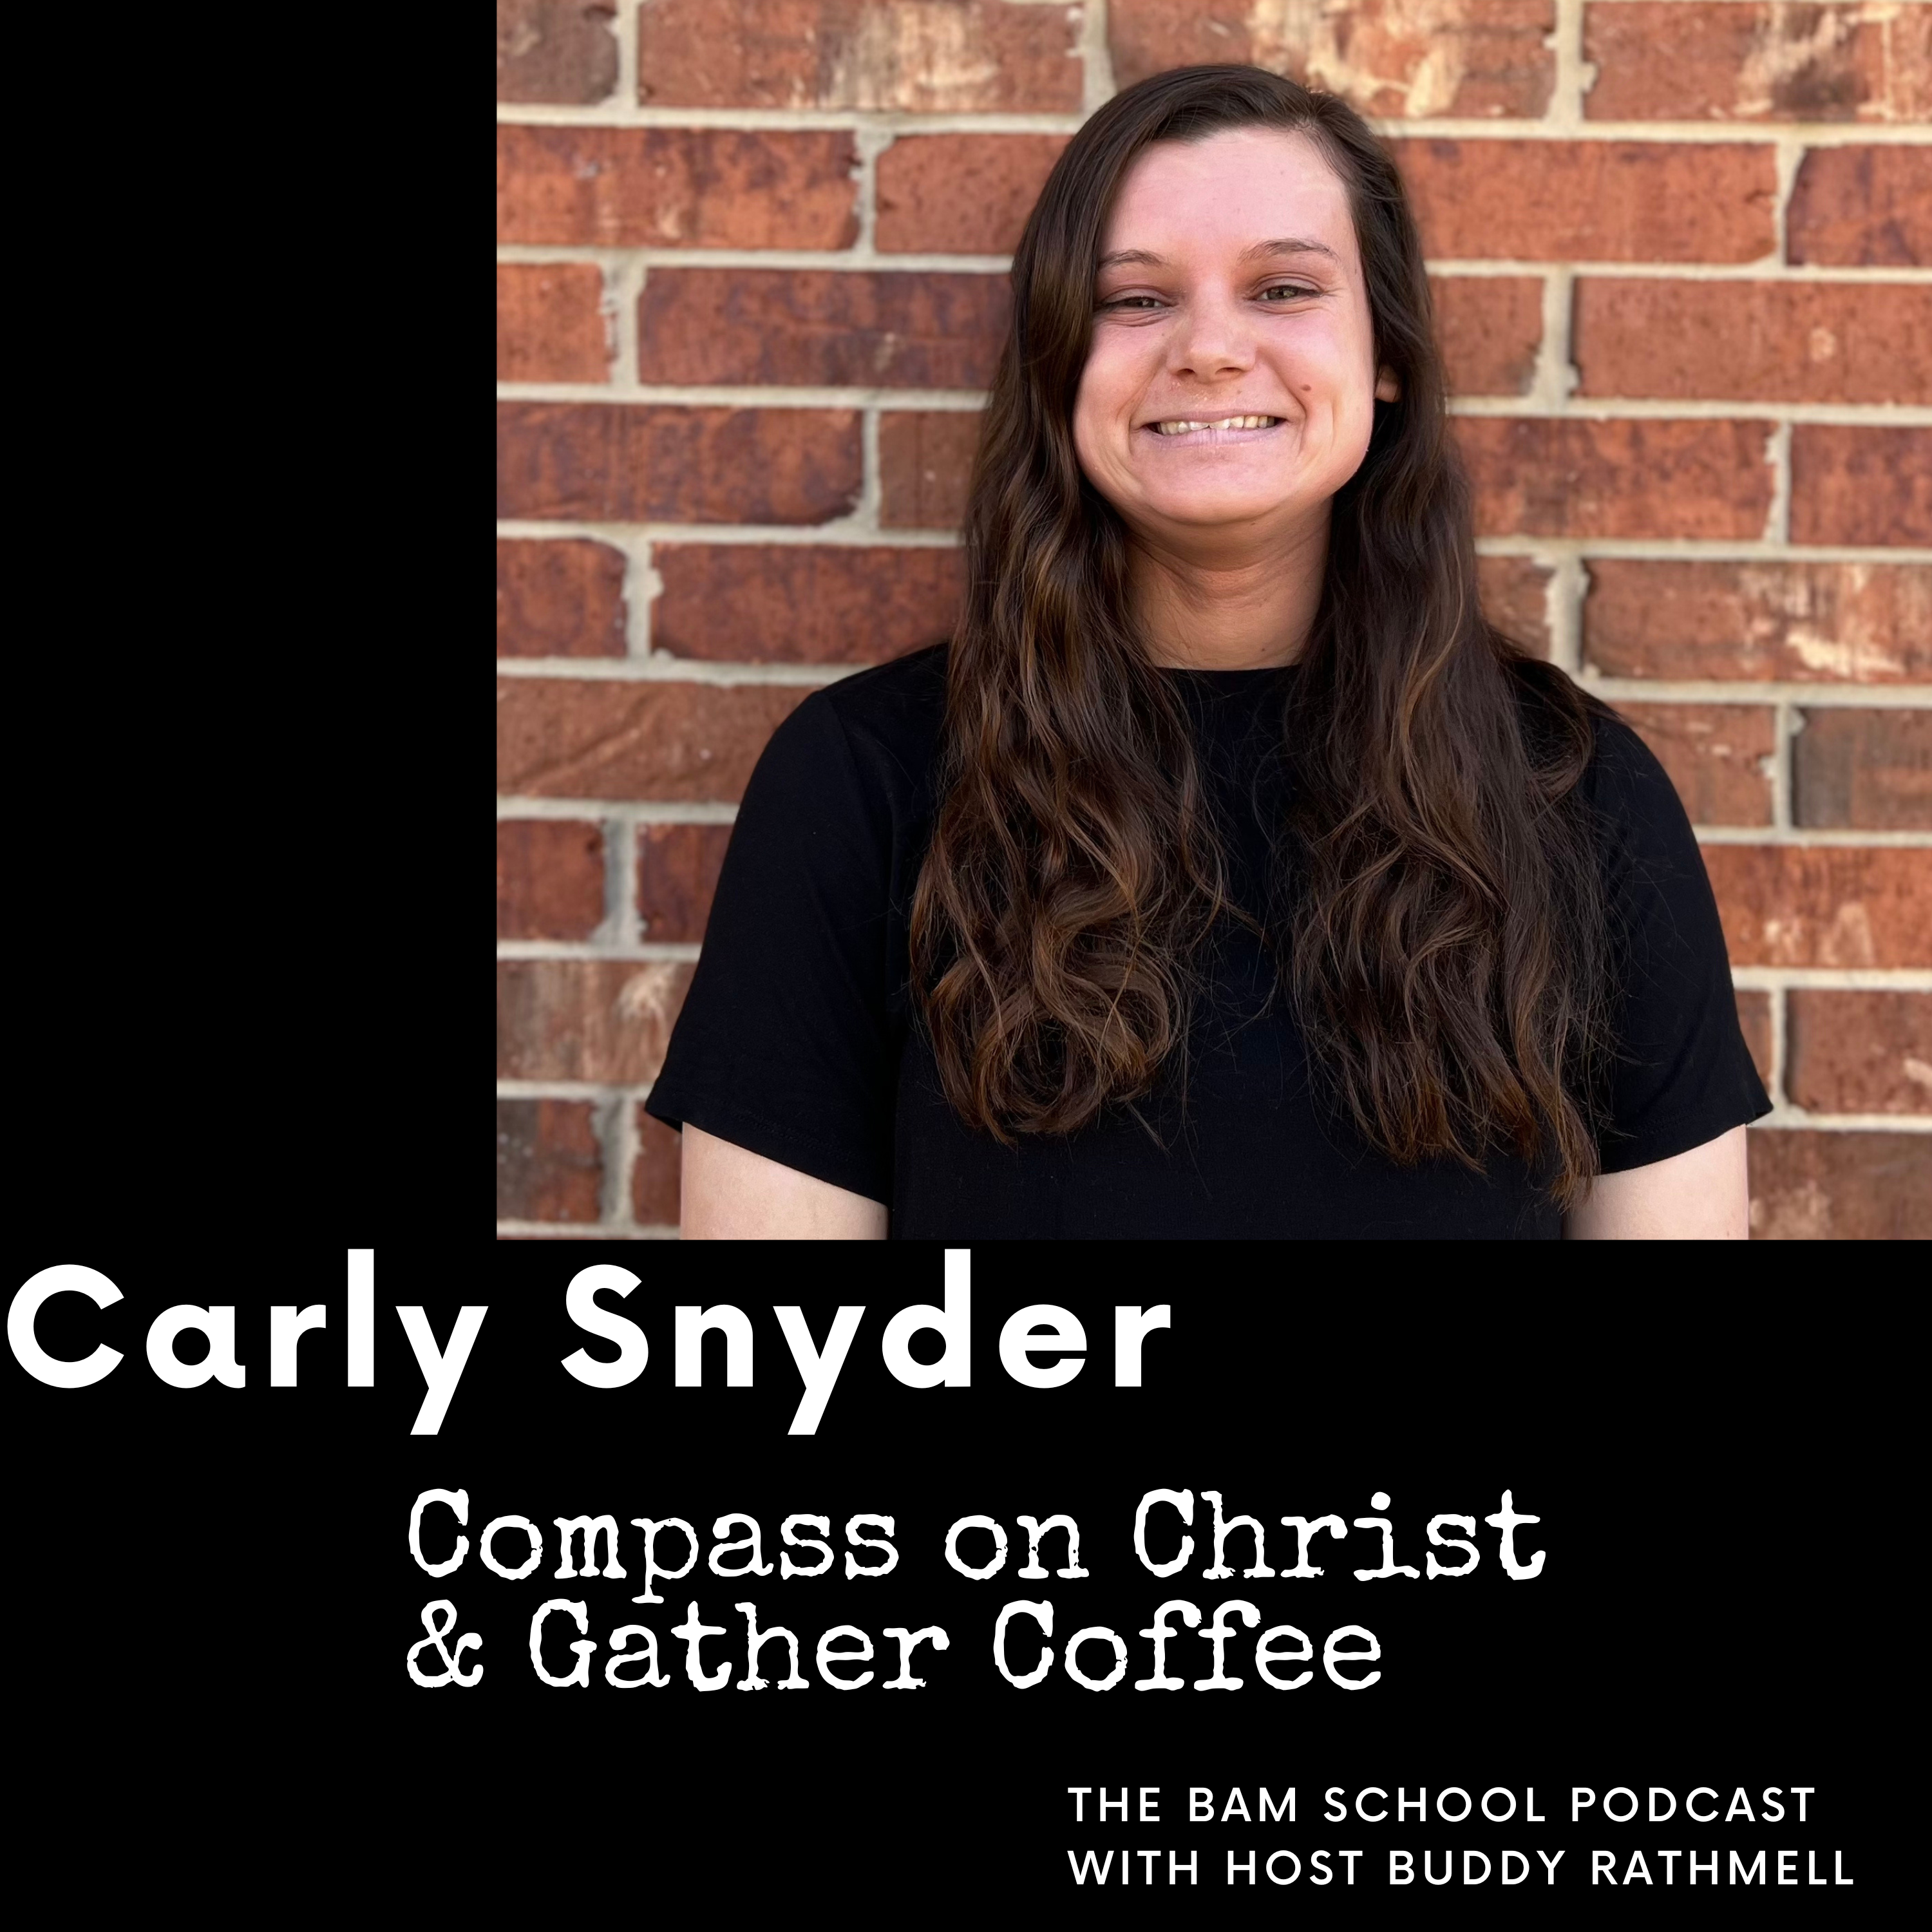 Carly Snyder - Compass on Christ & Gather Coffee